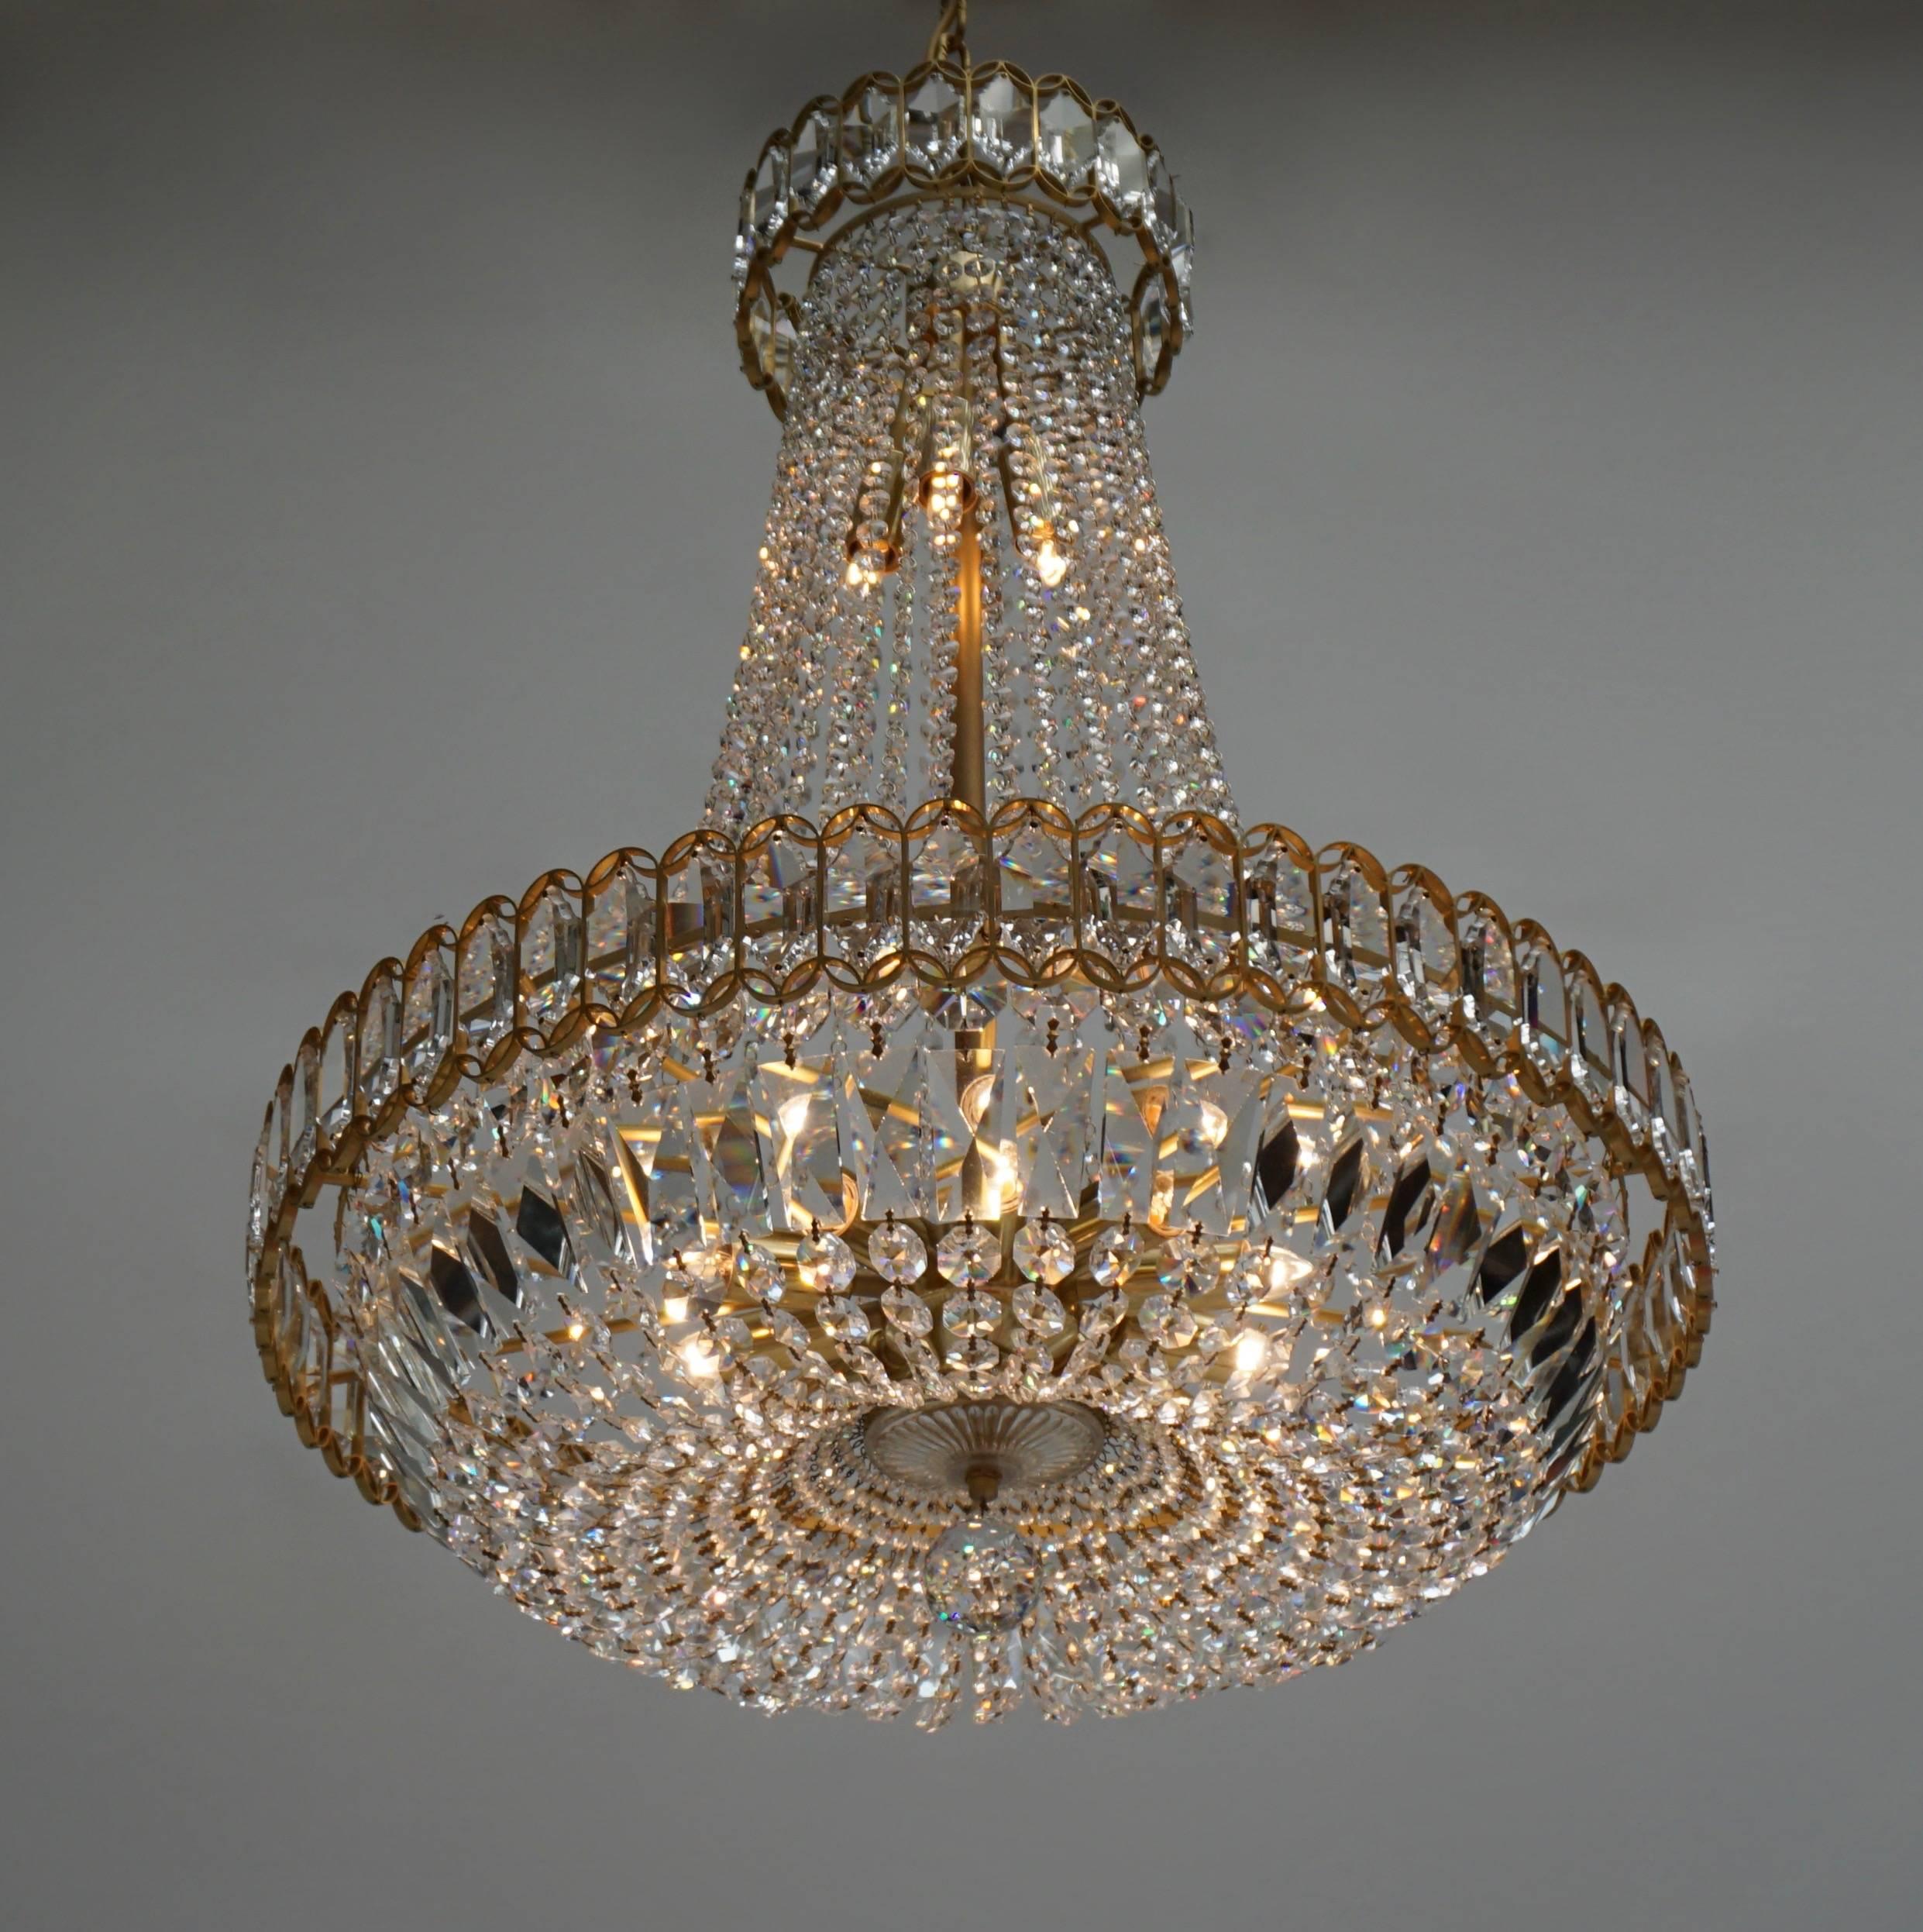 Beautiful crystal and brass chandelier.
Total height with the chain is 140 cm.
Height fixture is 72 cm.
Diameter is 62 cm.
The chandelier has 14 E14 bulbs.